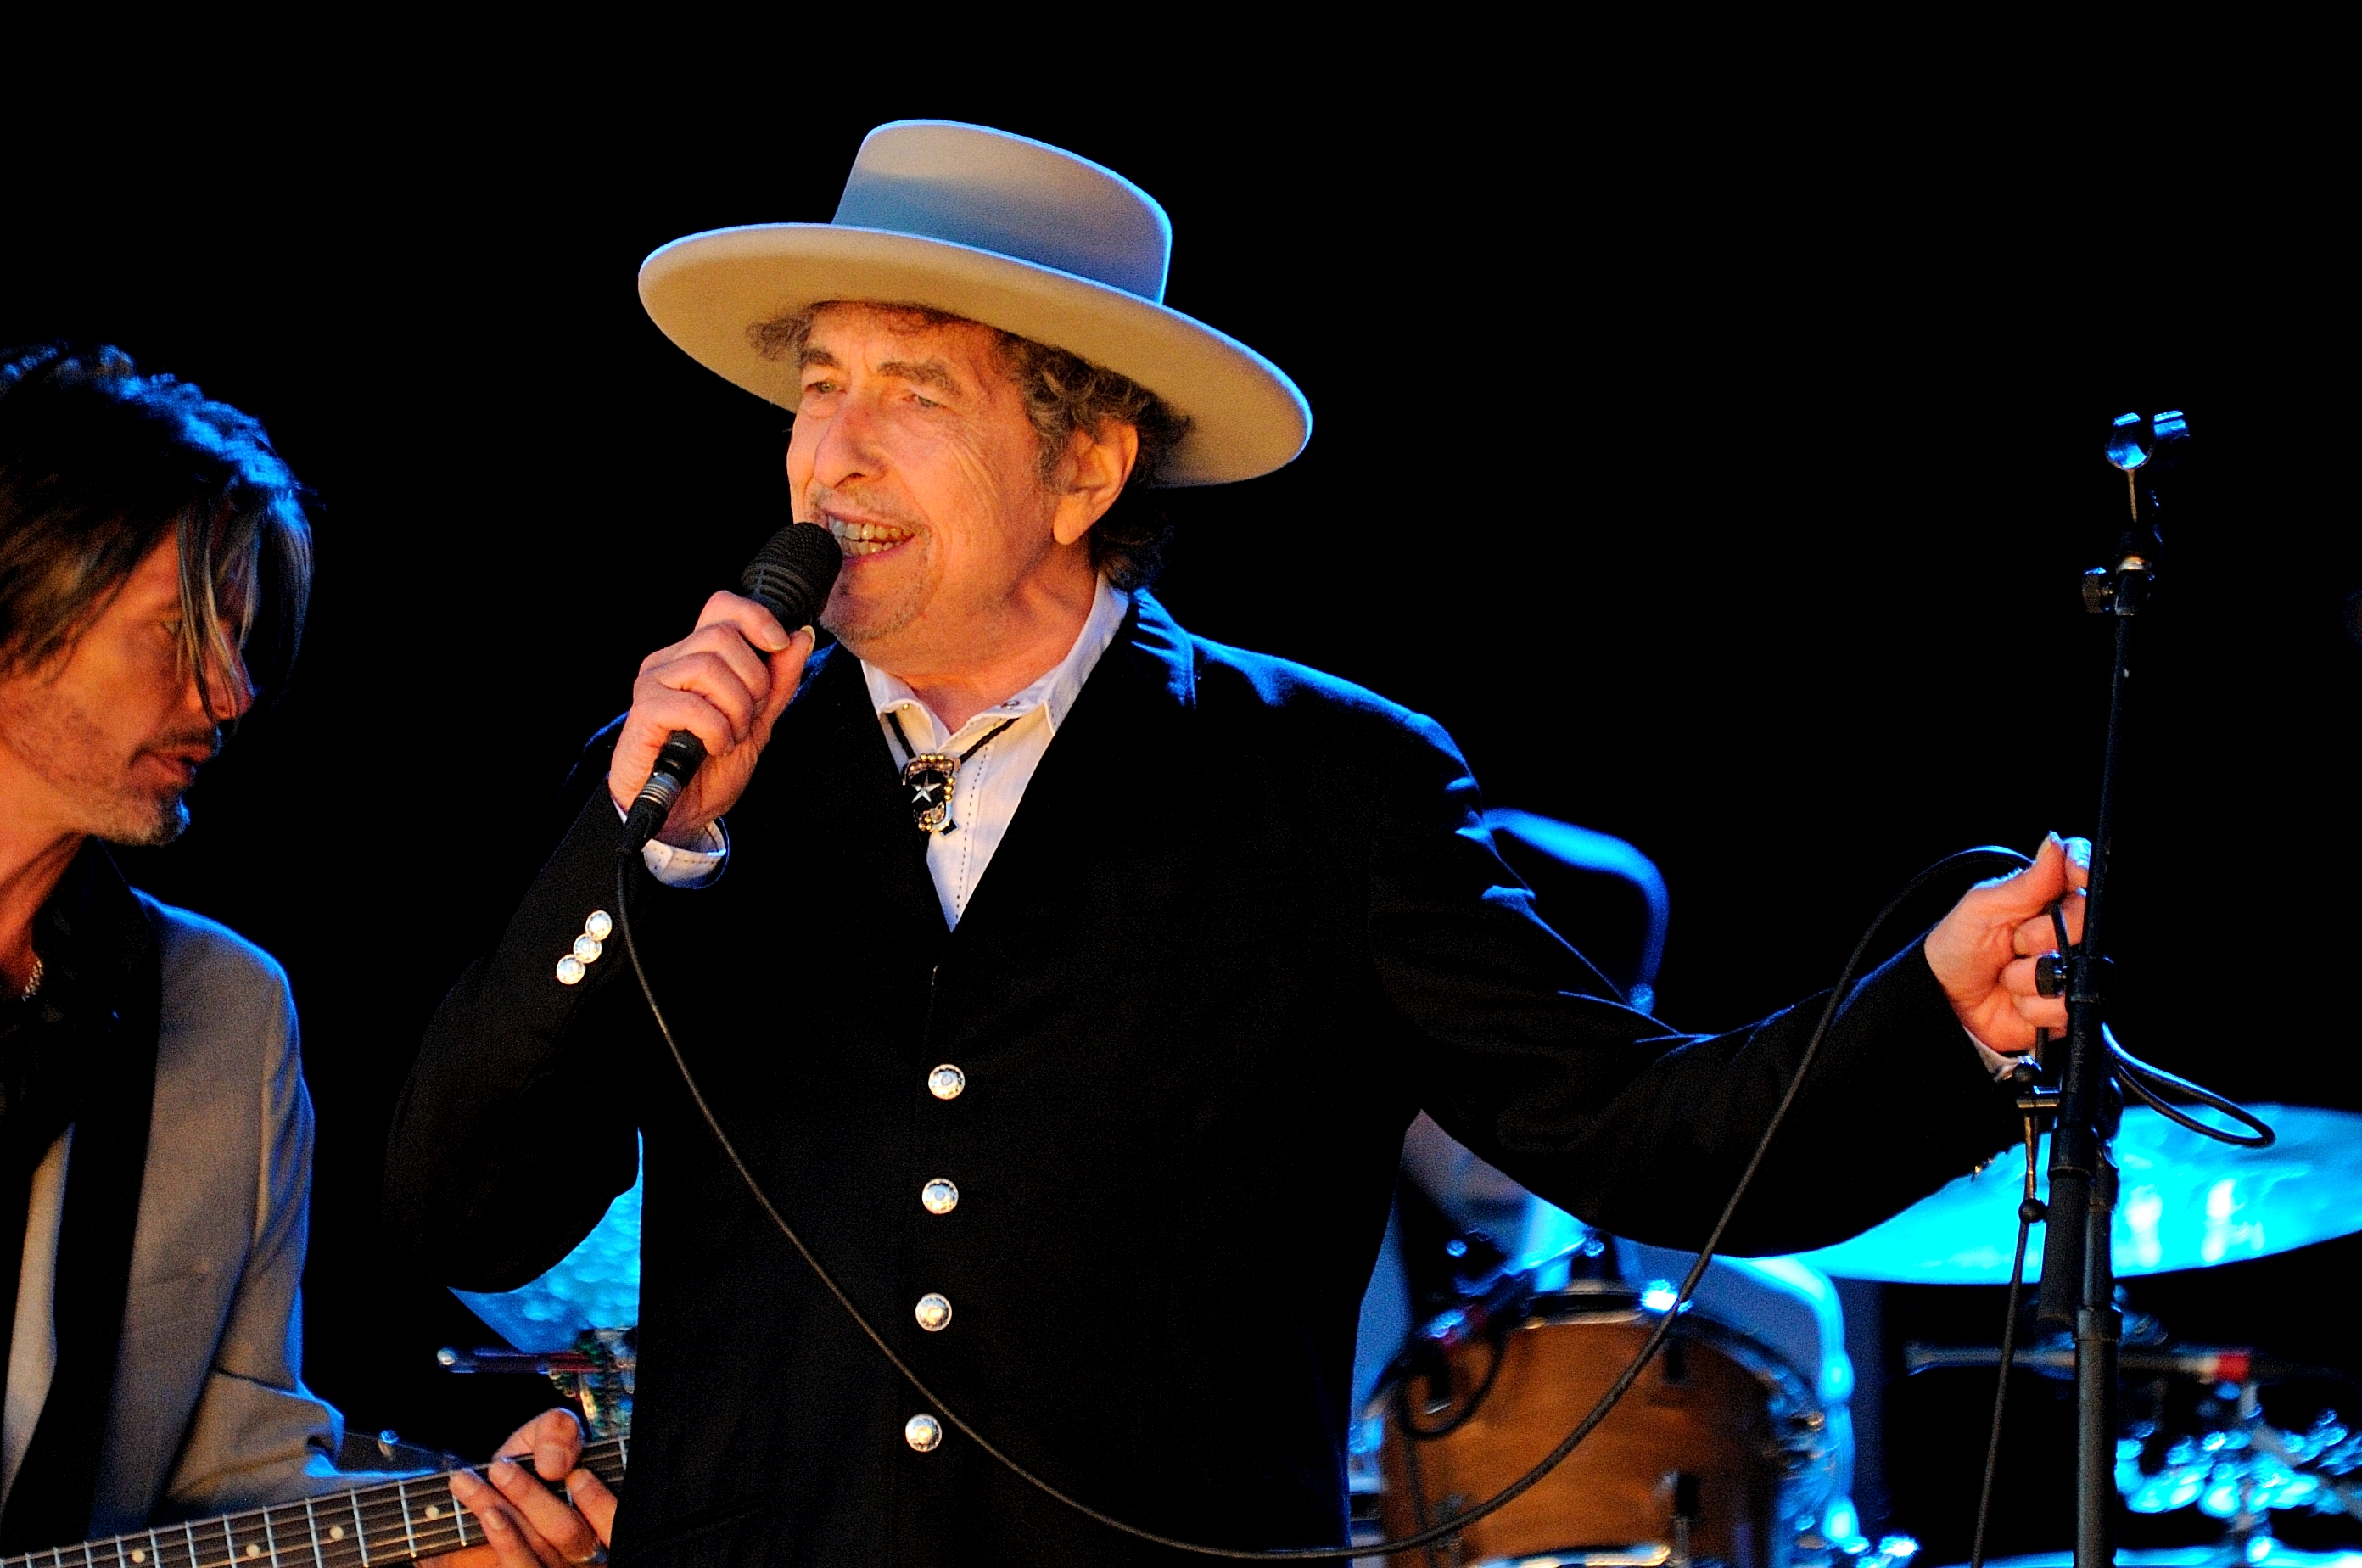 Bob Dylan performs on stage during Hop Farm Festival on June 30, 2012 in Paddock Wood, United Kingdom. (Gus Stewart—Redferns via Getty Images)